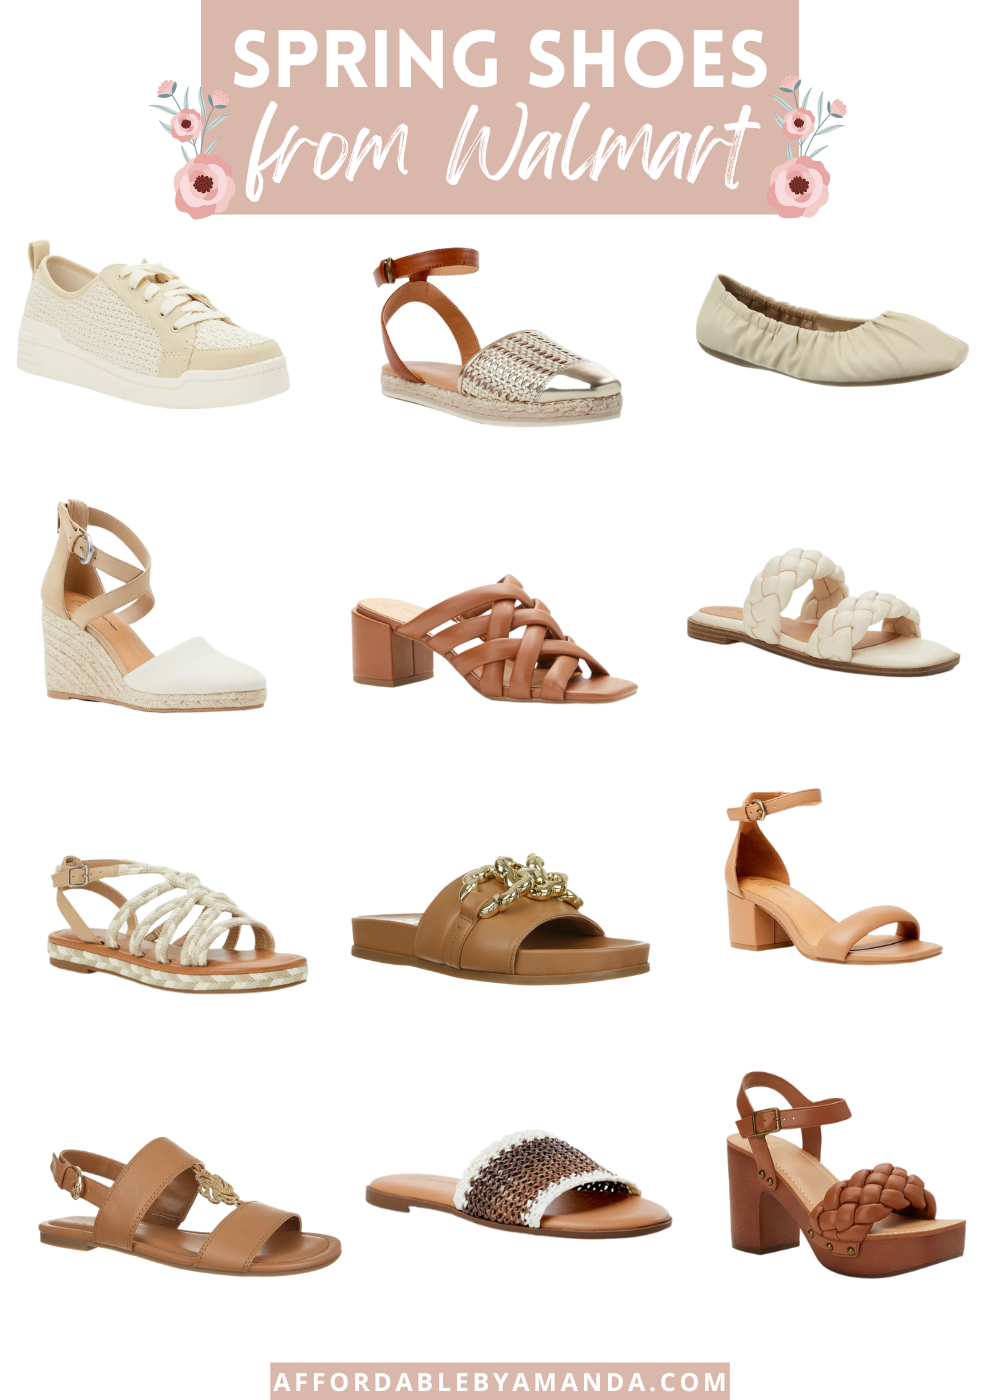 Top Spring 2023 Shoe Trends Everyone Will Be Wearing This Year | What Shoes Will Be Popular for 2023? Spring/Summer 2023 Shoe Trends